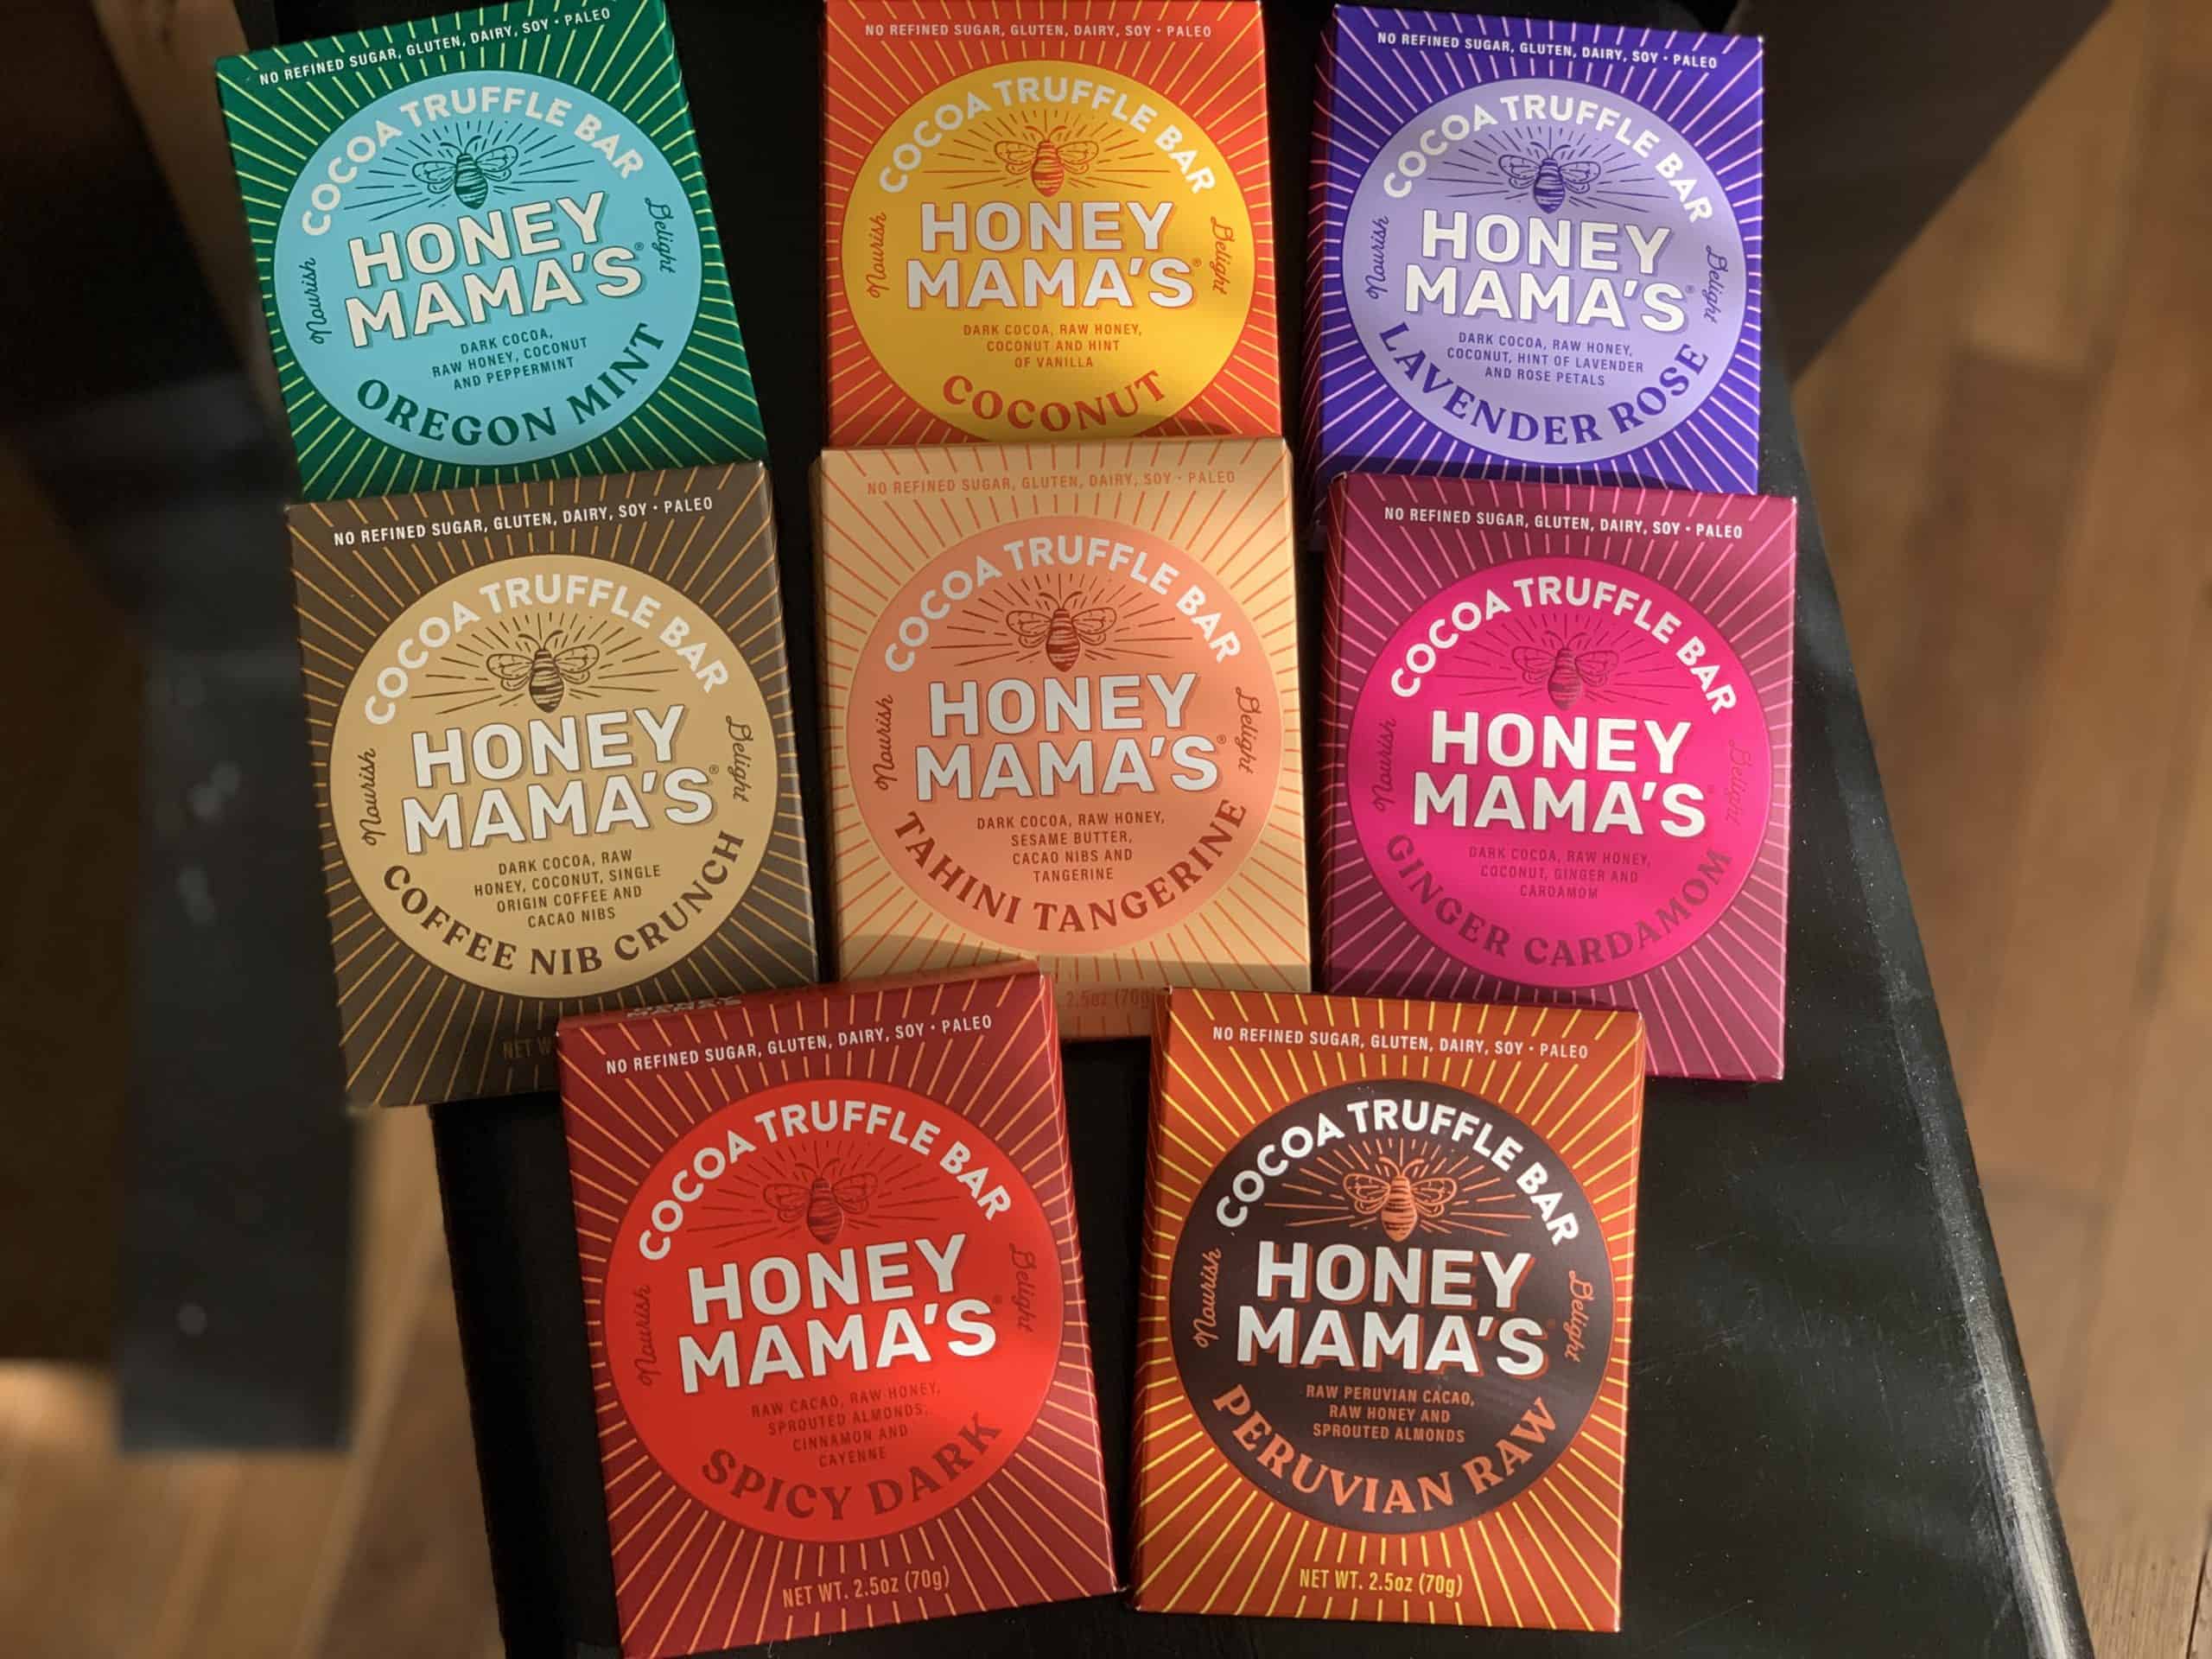 things to make your life easier in 2022 - honey mama's cocoa truffle bar